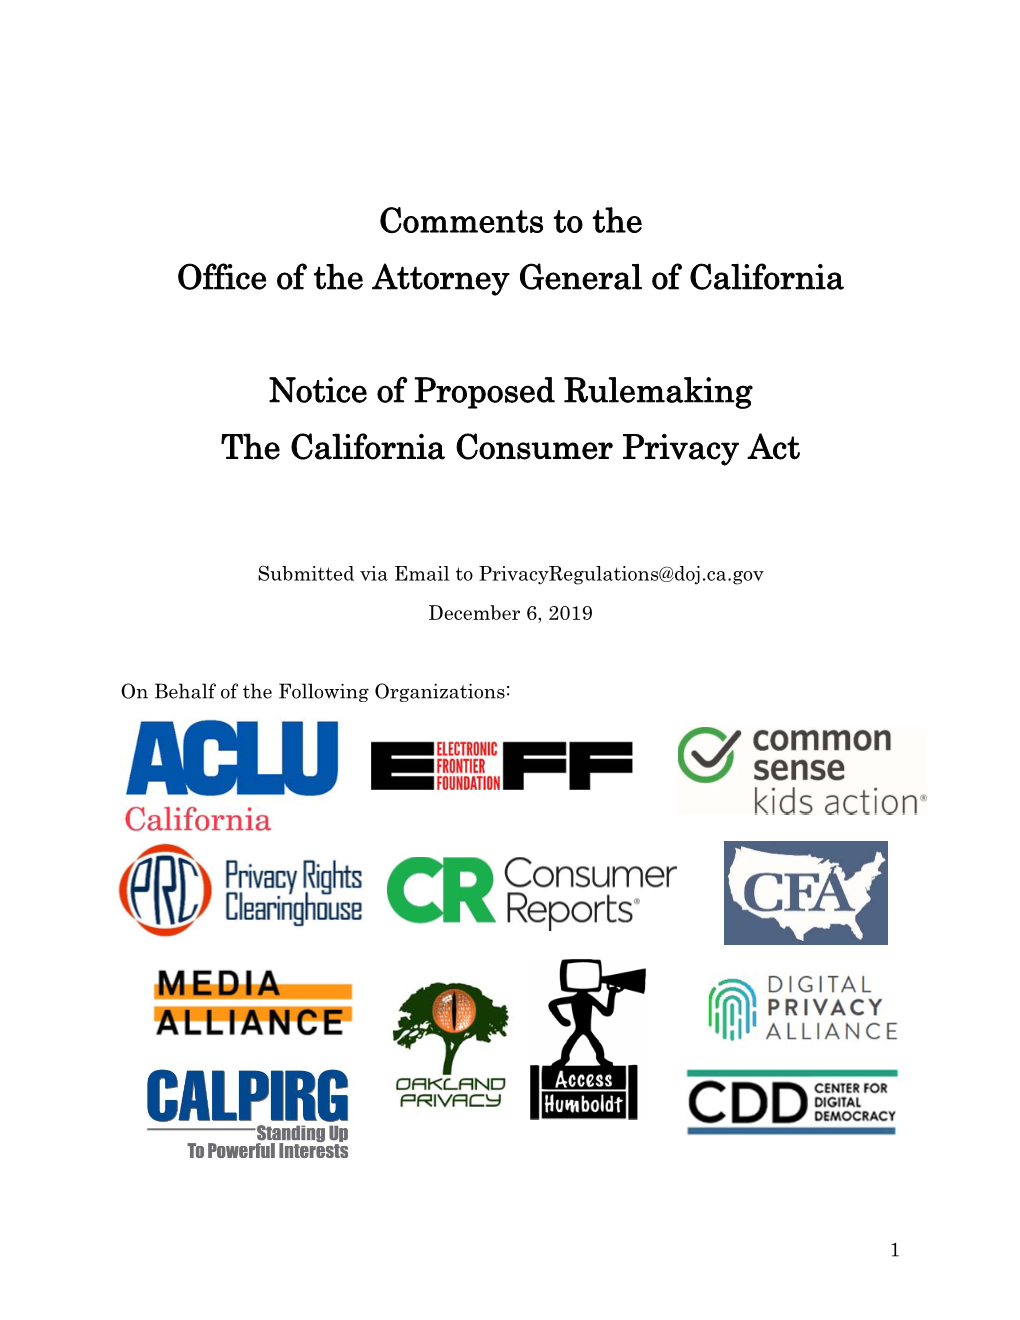 Comments to the Office of the Attorney General of California Notice Of